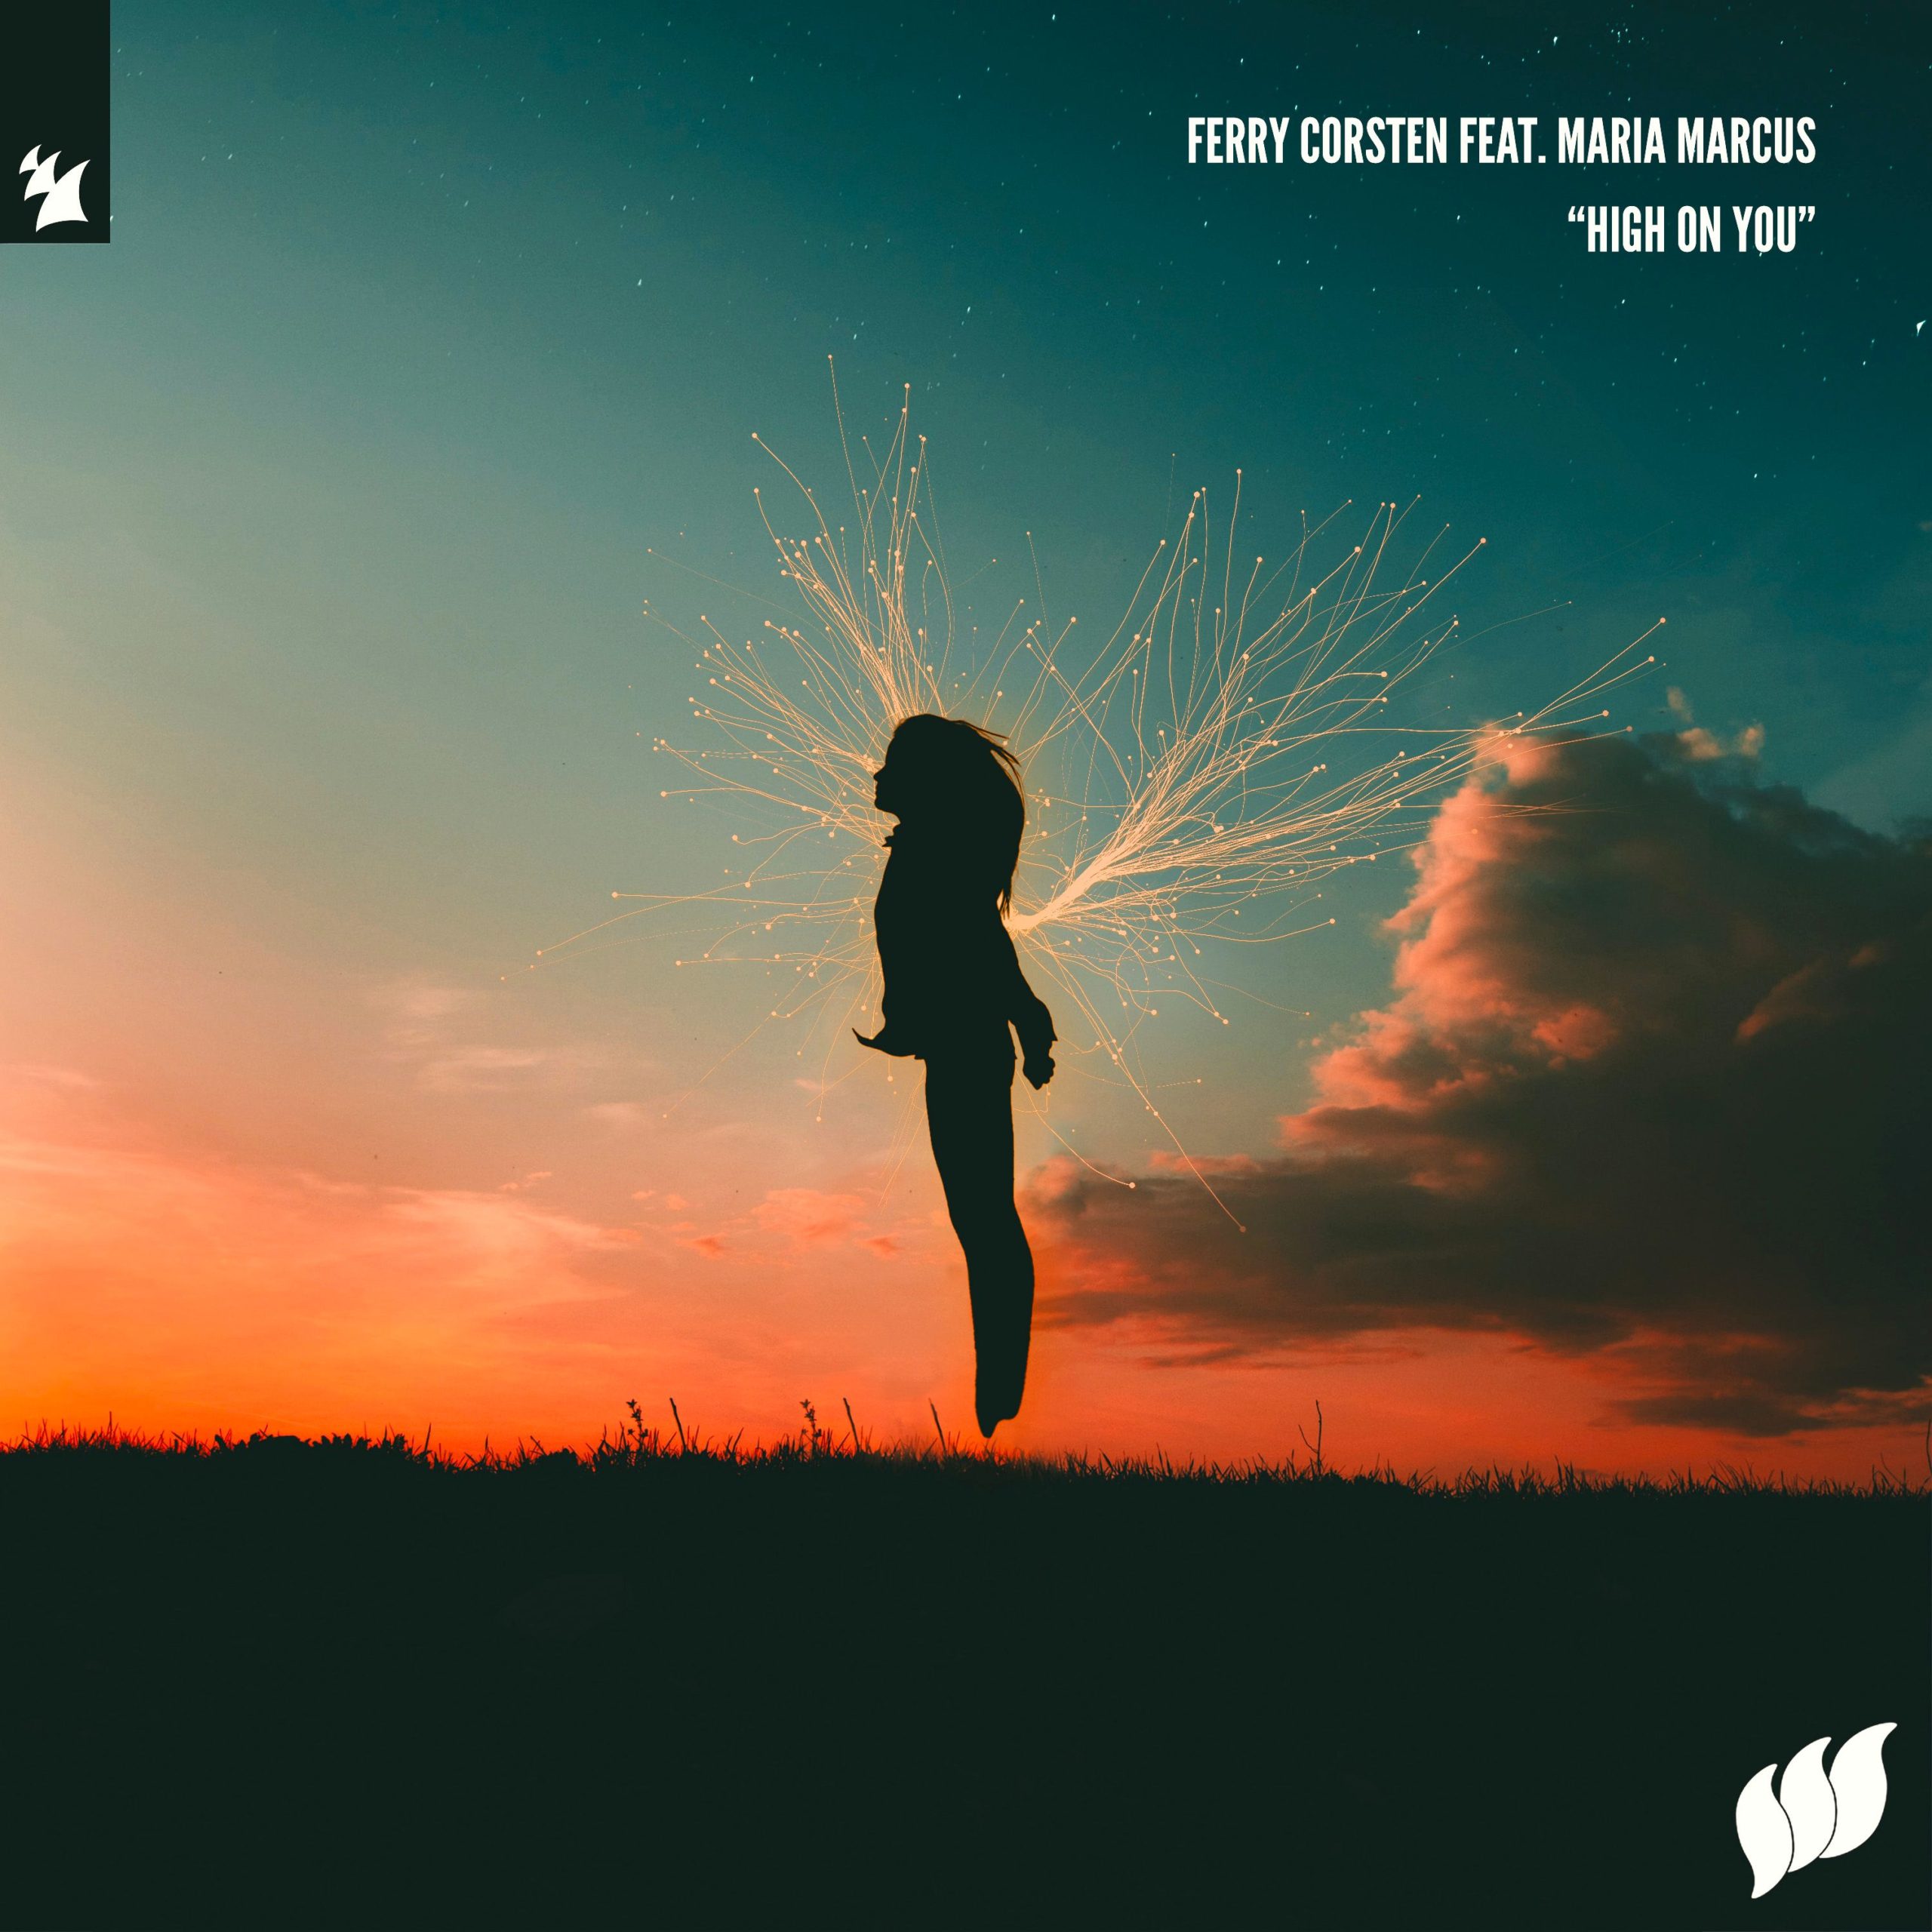 Ferry Corsten feat. Maria Marcus presents High On You on Armada Music